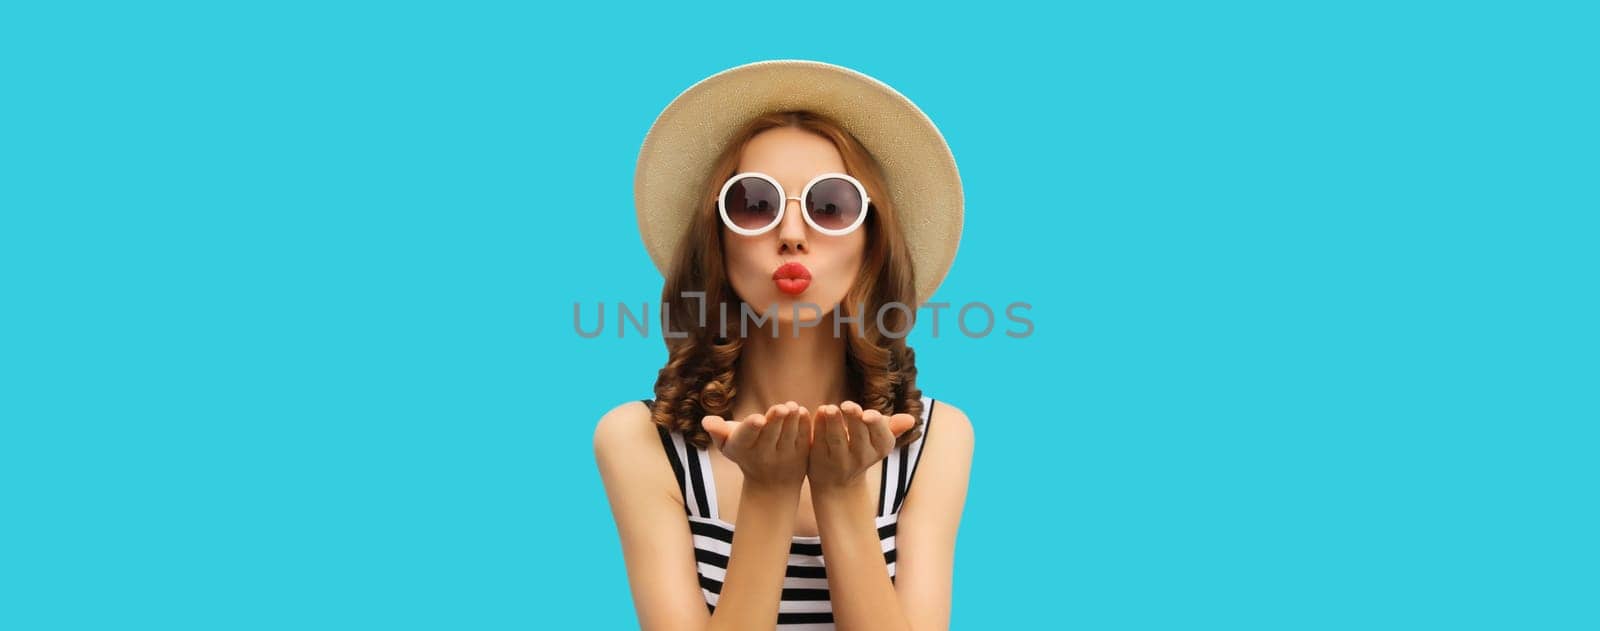 Portrait of beautiful young woman posing blowing kiss wearing summer straw hat and dress on blue background